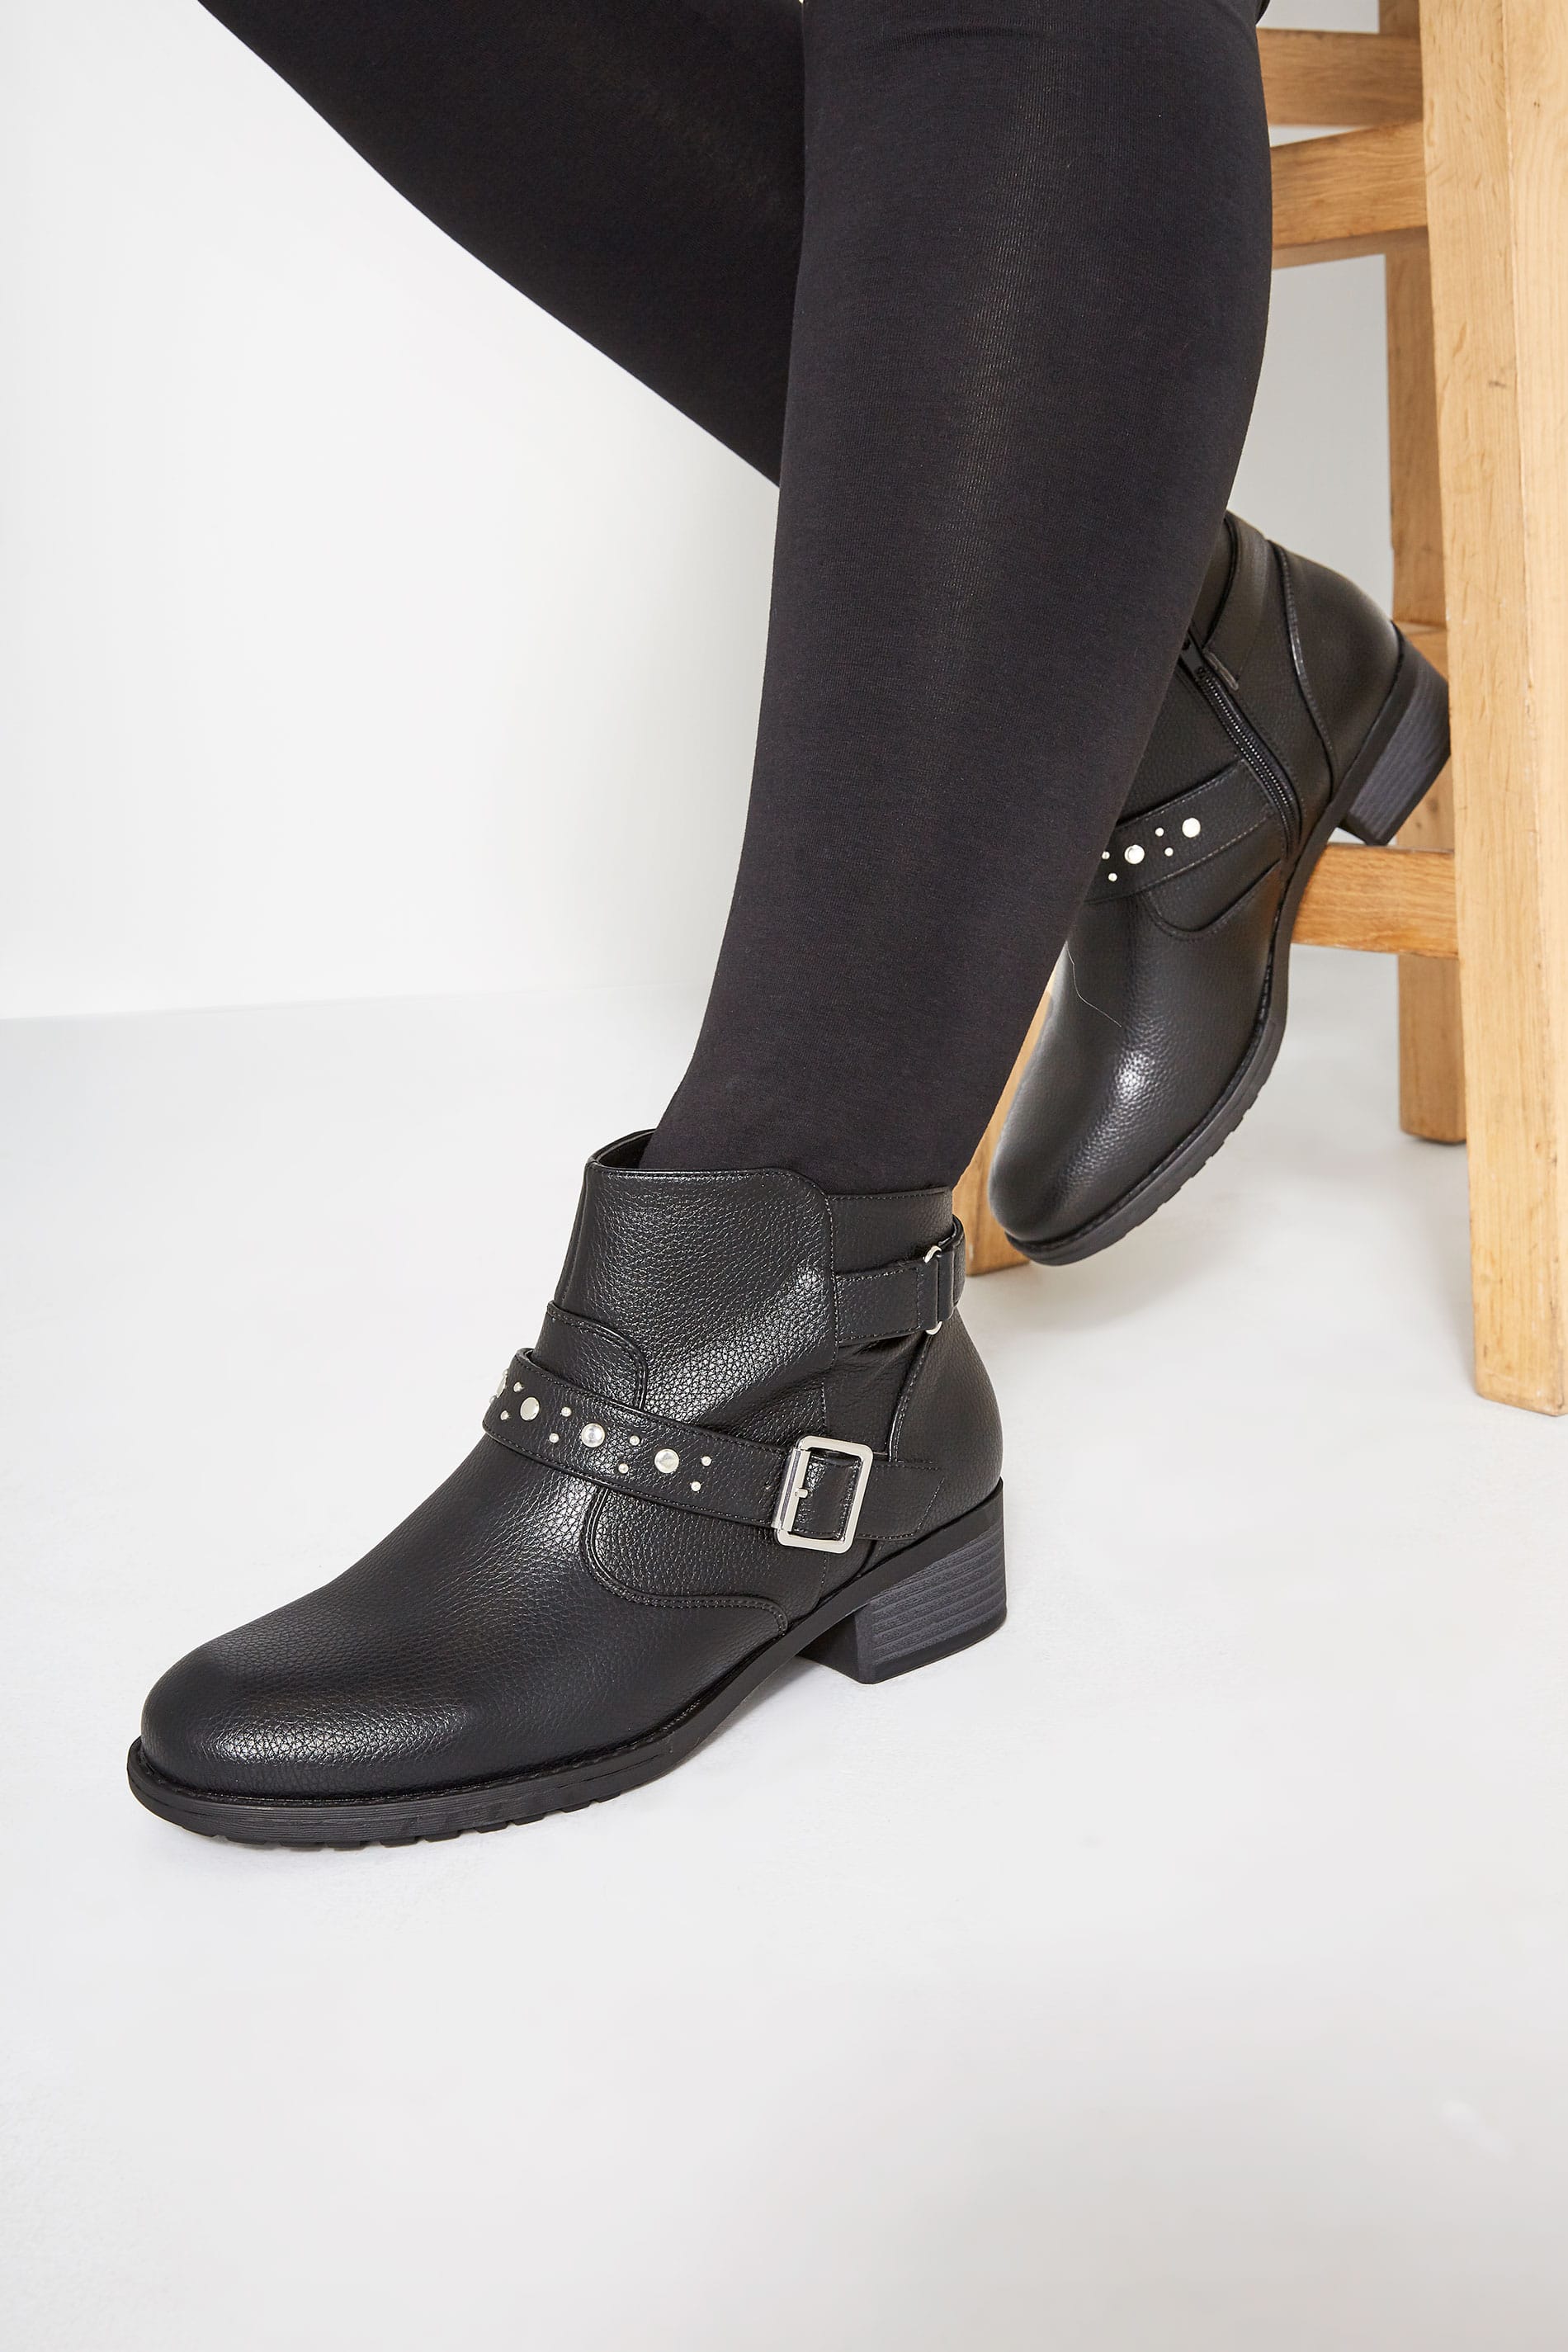 wide black ankle boots